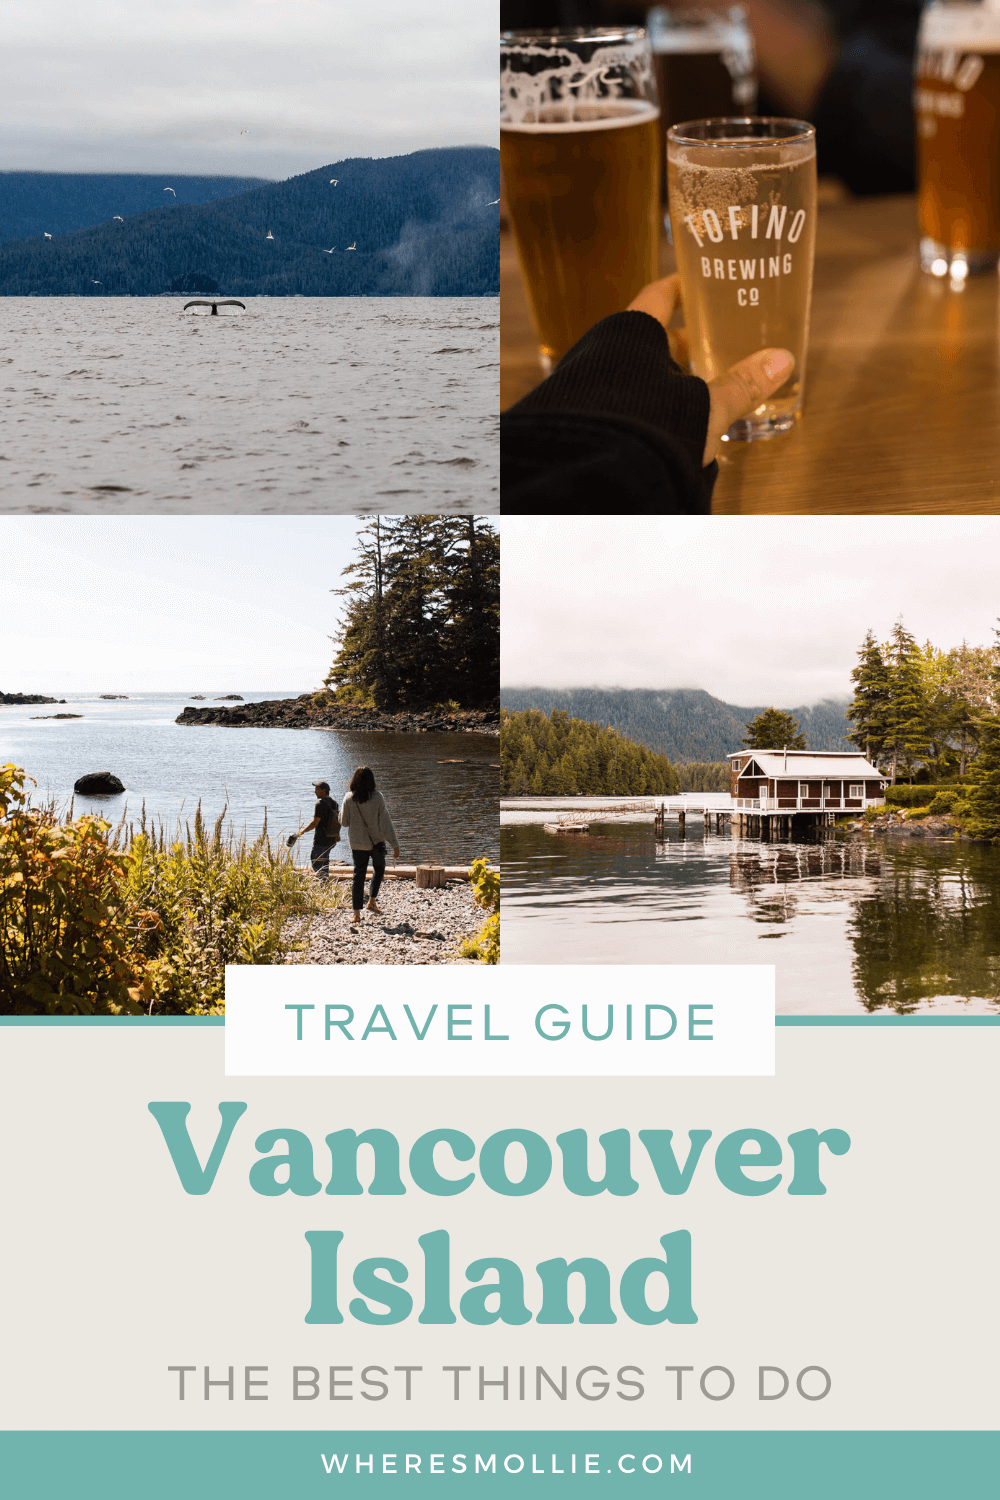 The best things to do and see on Vancouver Island